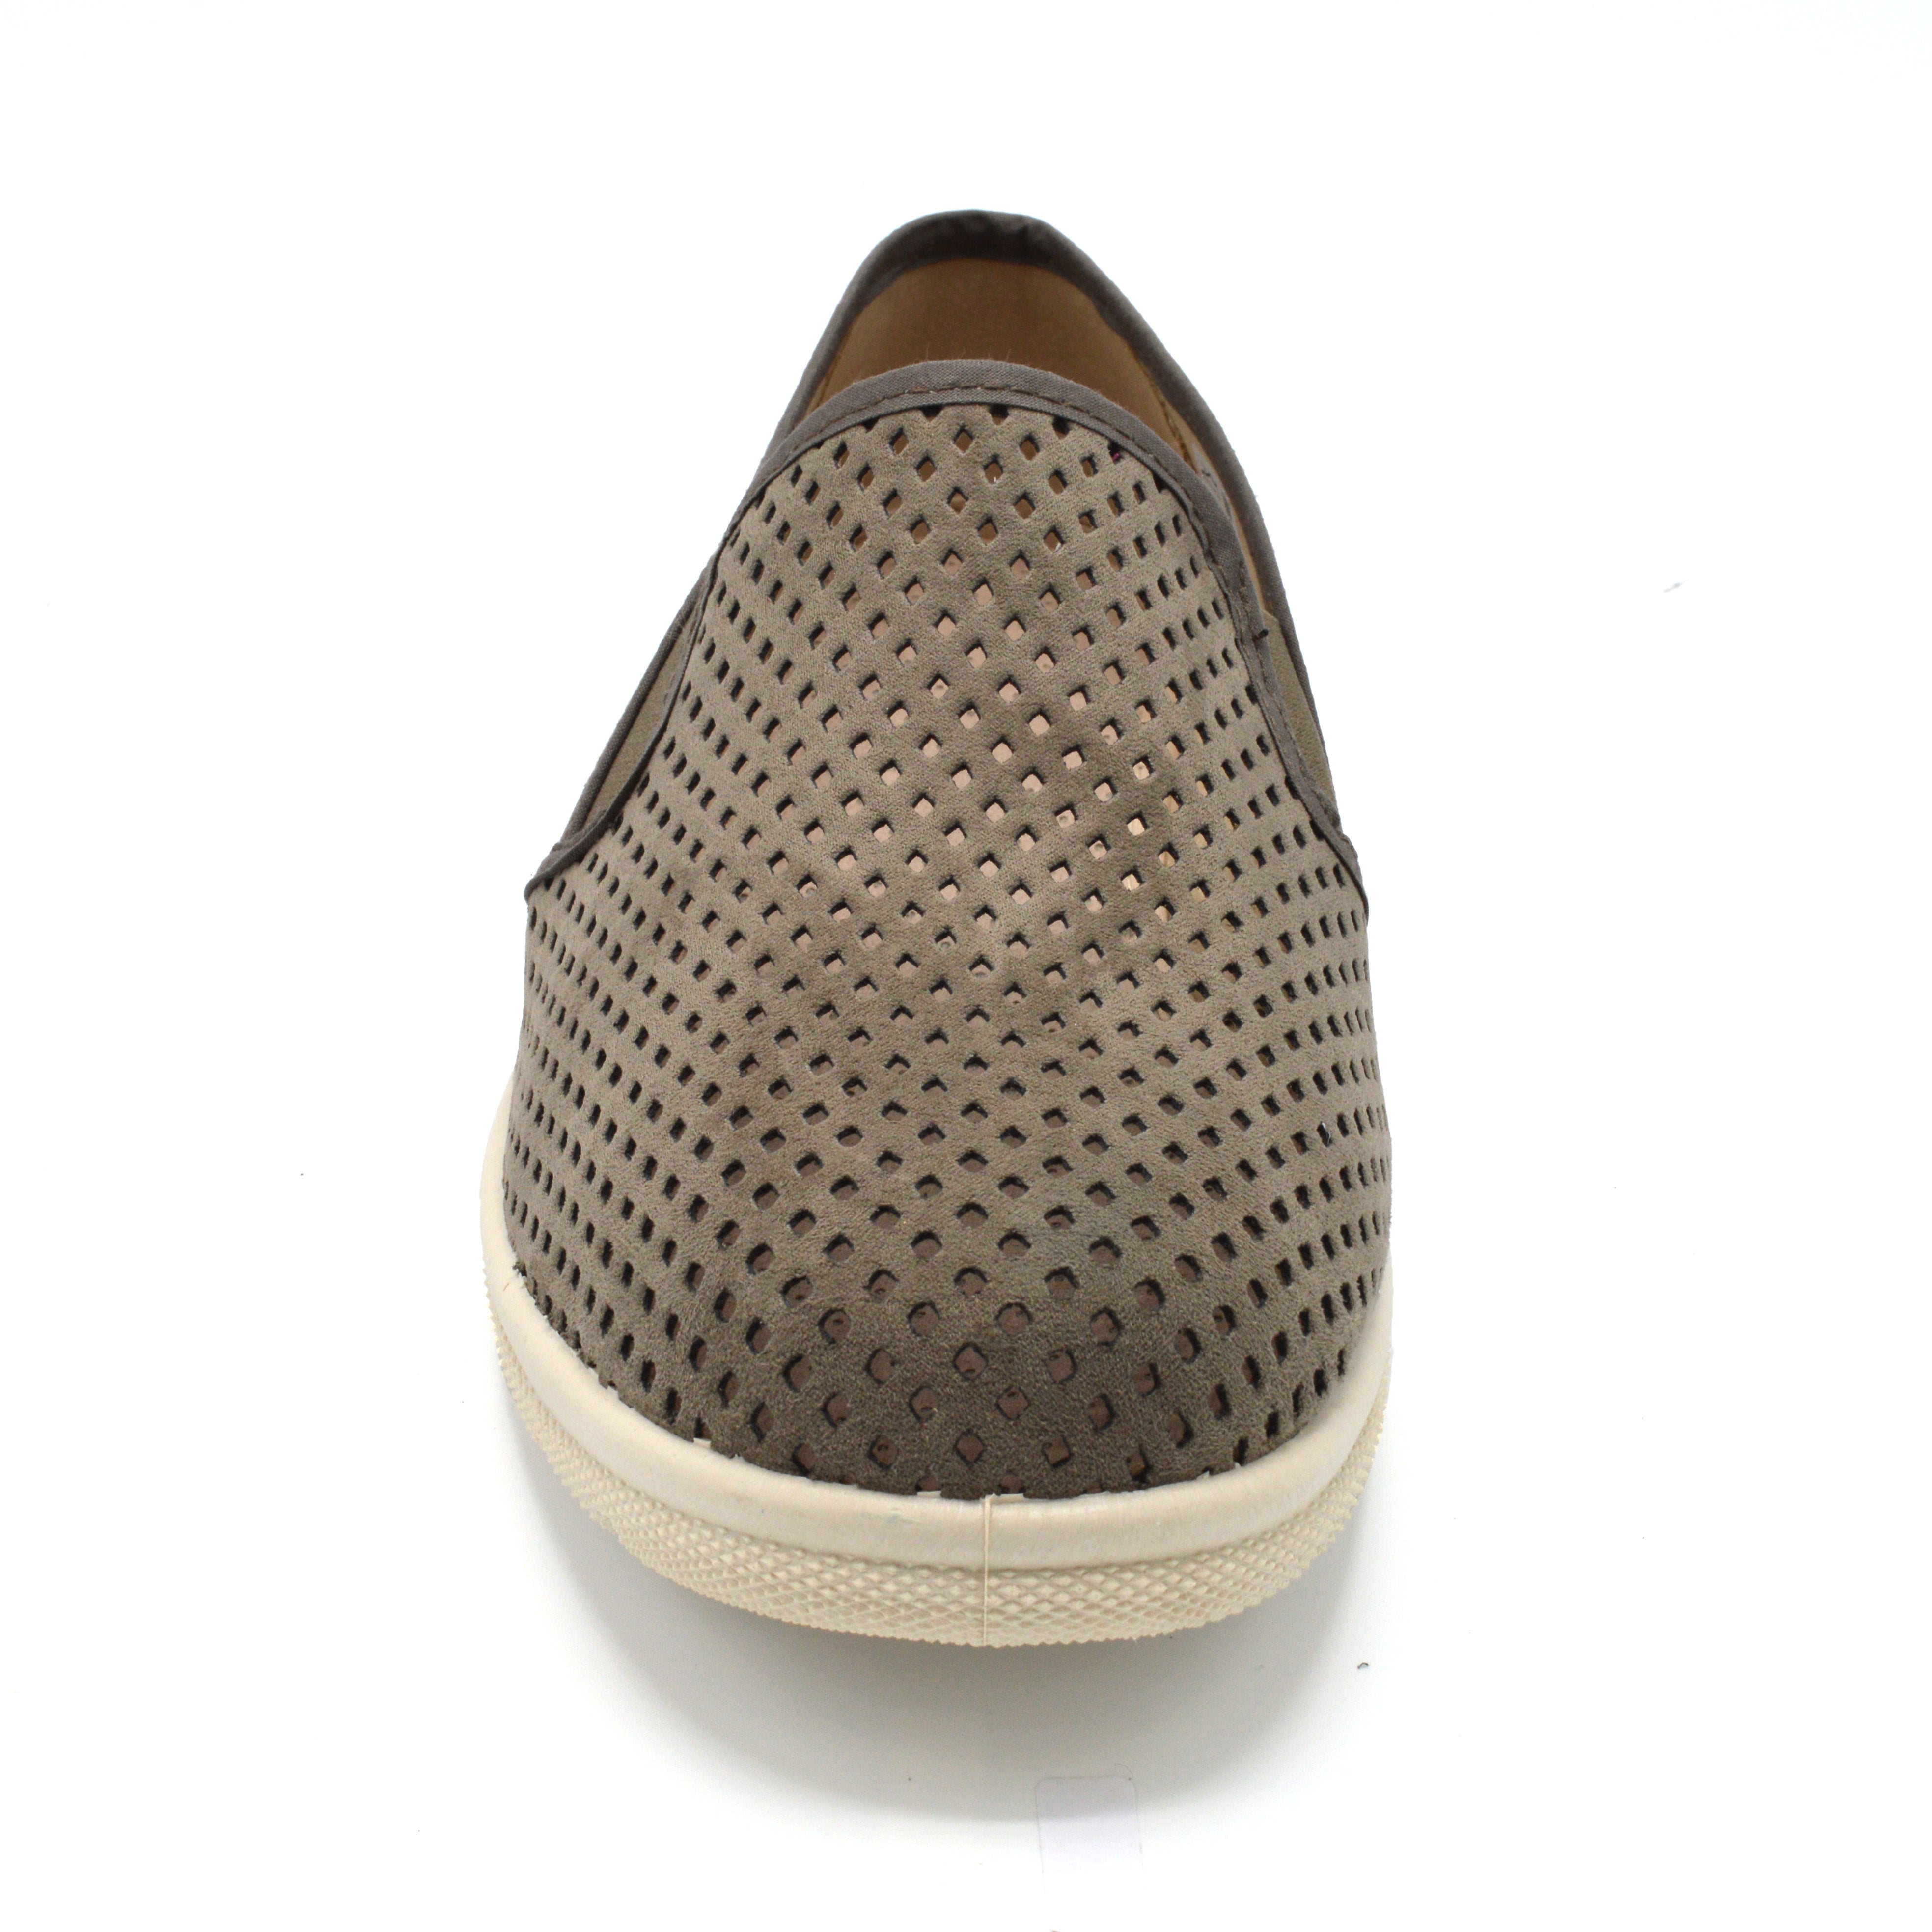 Extra Wide Slip On Suede Shoe For Orthotics